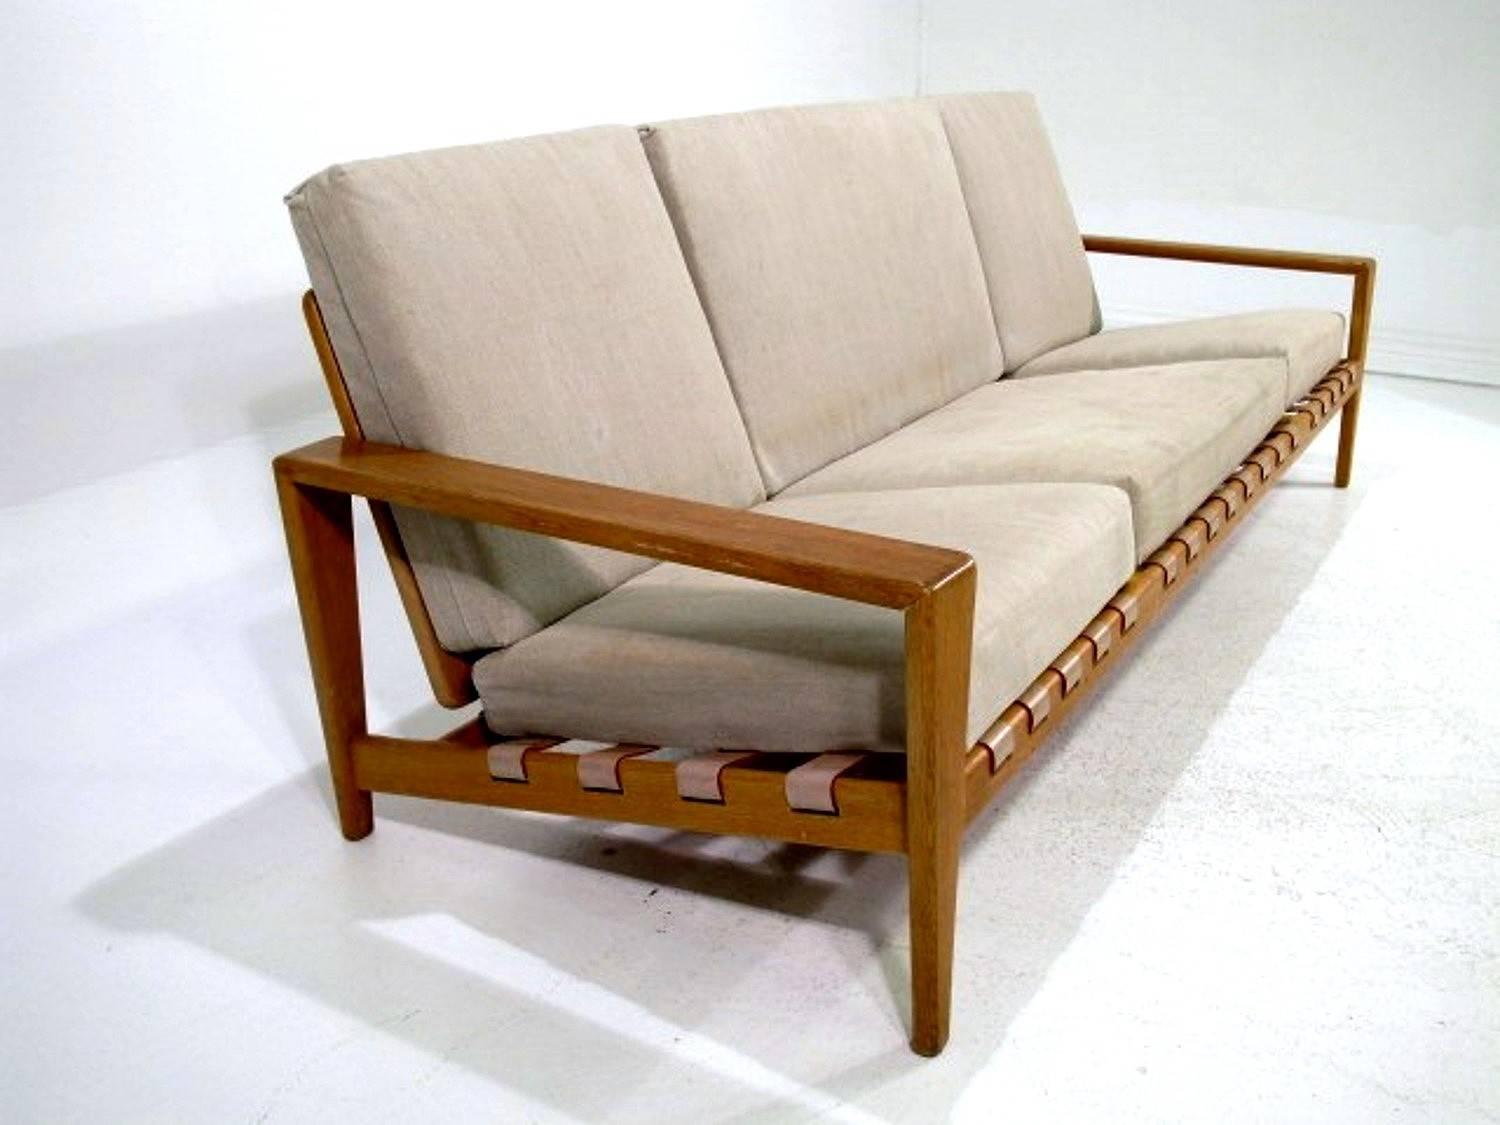 Scandinavian modern sofa designed by Svante Skogh for AB Hjertquist & Co, Nässjö, Sweden. The frame is in oak with leather straps and the cushions with linnen fabric. 
Later fabric with stains.